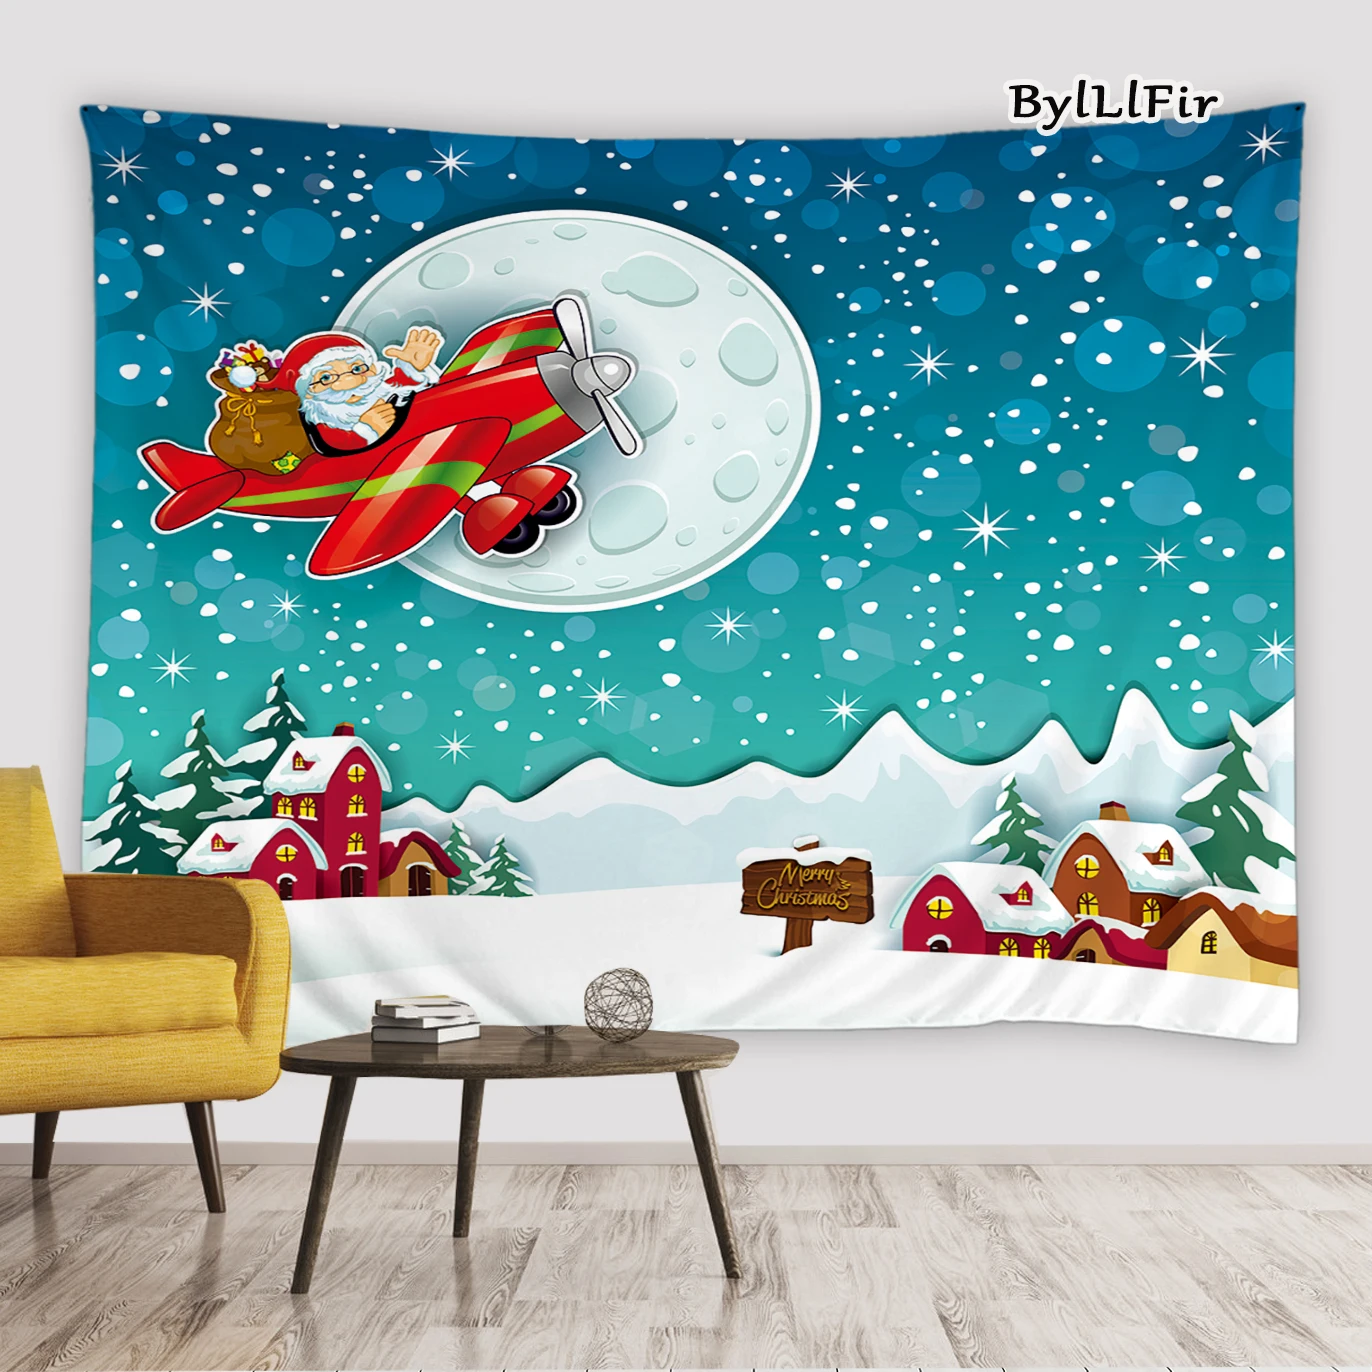 

Merry Christmas Tapestry Wall Hanging Cute Cartoon Santa Gift Xmas New Year Party Tapestries Wall Art Living Room Bedroom Decor